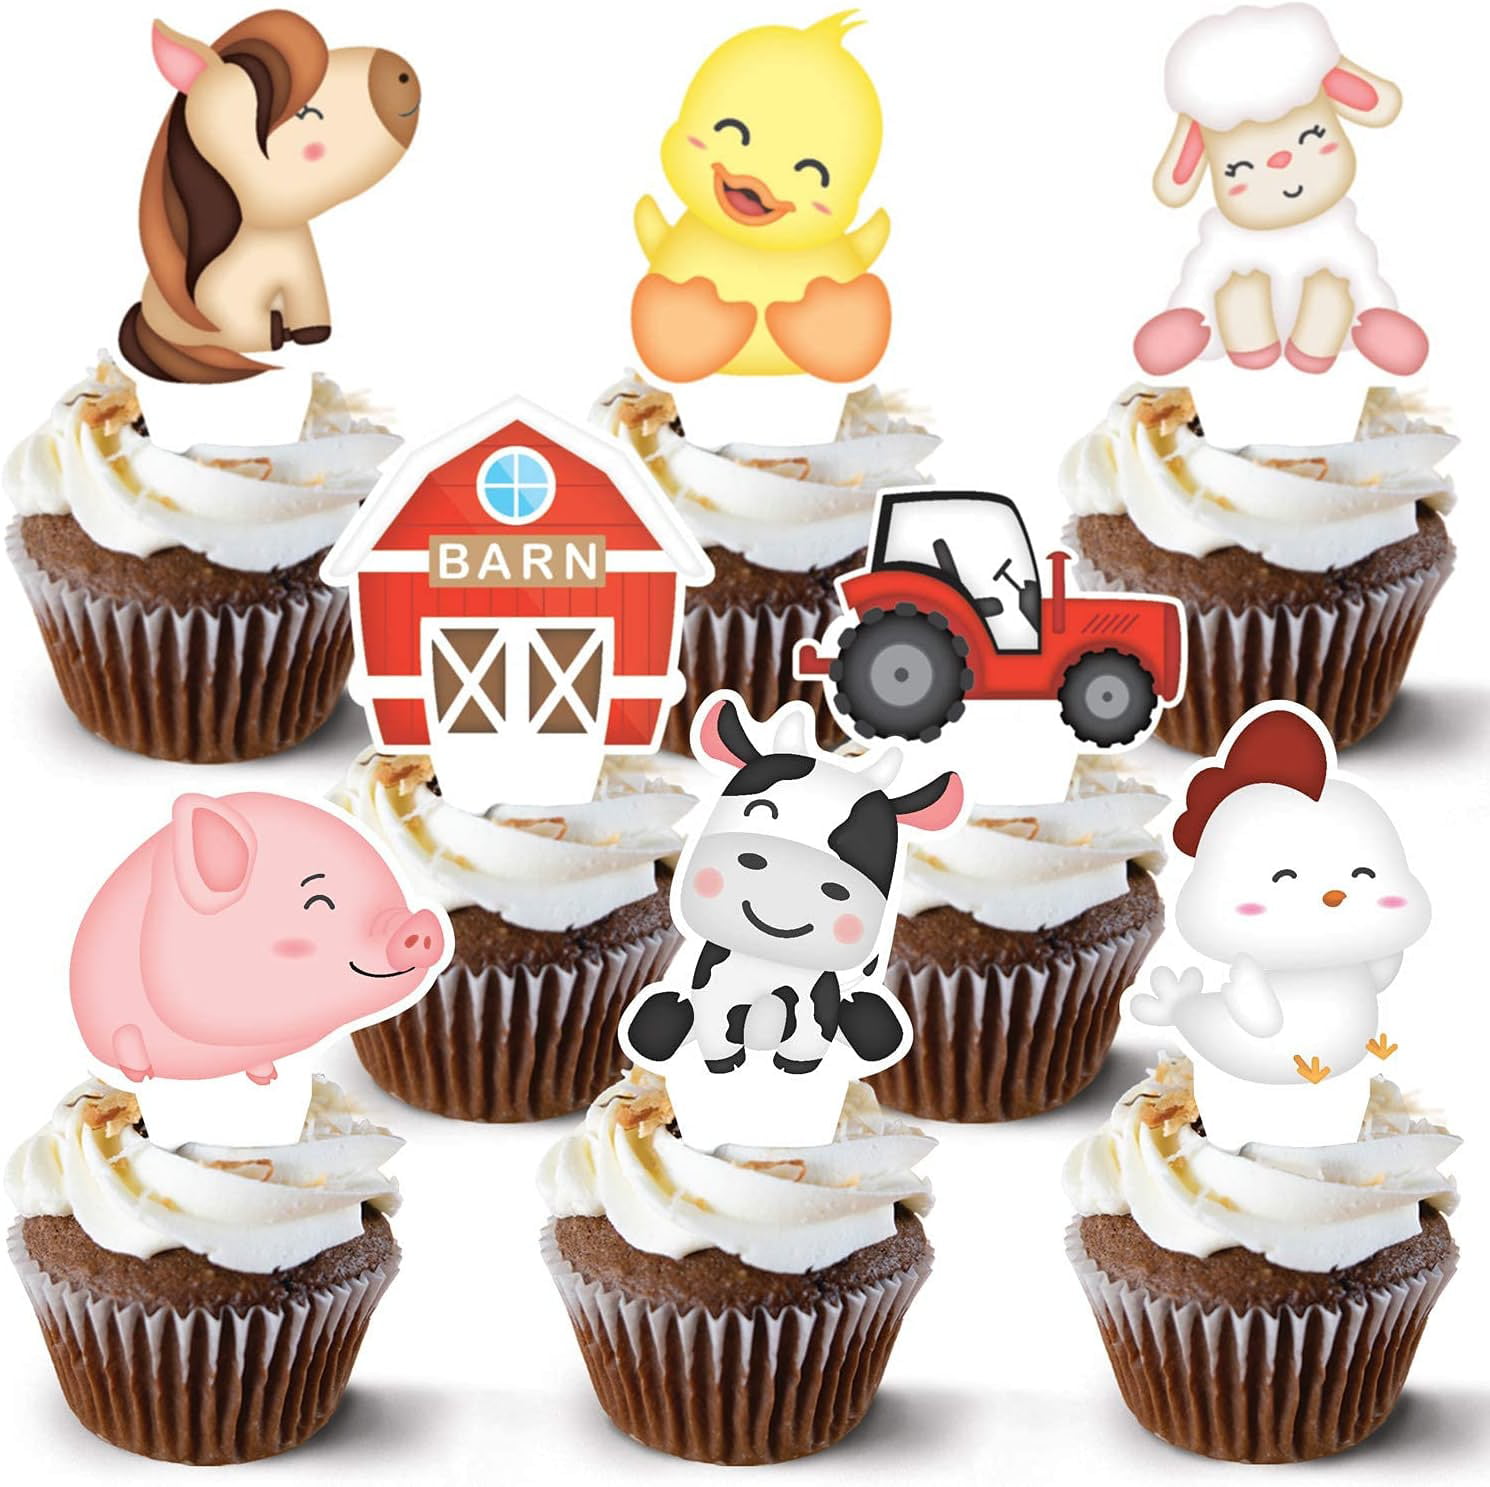 Farm Animal Cupcake Toppers 48 Count - Barn Animal Cupcake Toppers - Create  a Super Cute Farm Themed Baby Shower and Birthdays - Old McDonald  Decorations that's Easy to Use - Set of 48 